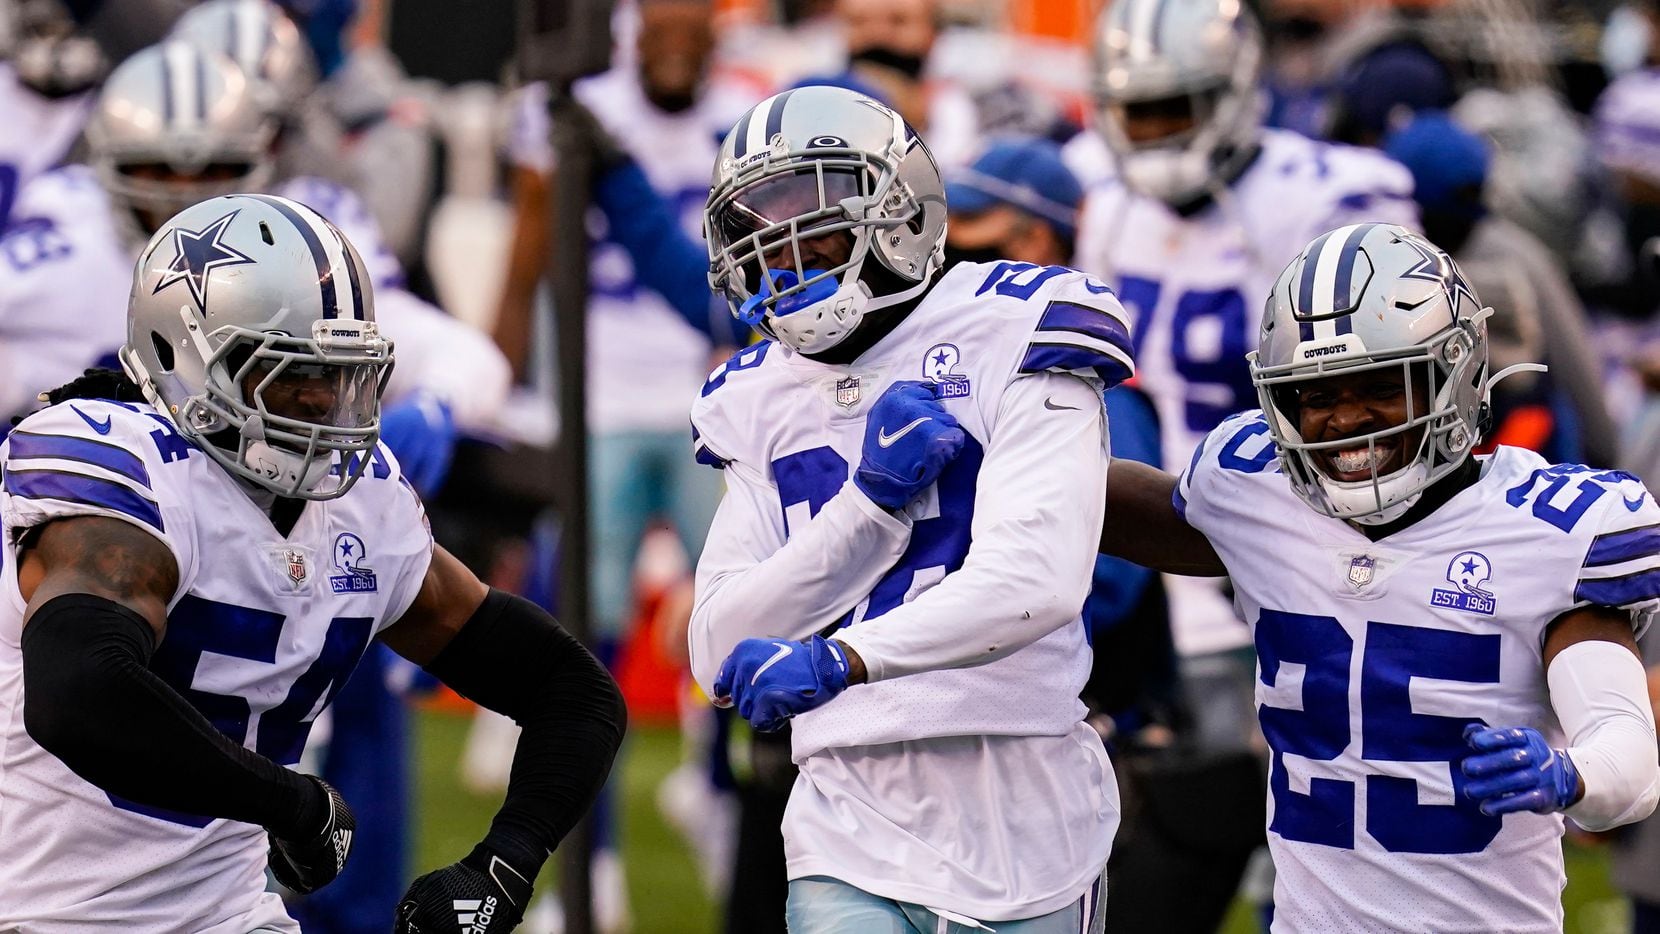 Dallas Cowboys cornerback Rashard Robinson, center celebrates a defensive stop against the Cincinnati Bengals with free safety Xavier Woods (25) and middle linebacker Jaylon Smith (54) in the second half of an NFL football game in Cincinnati, Sunday, Dec. 13, 2020.